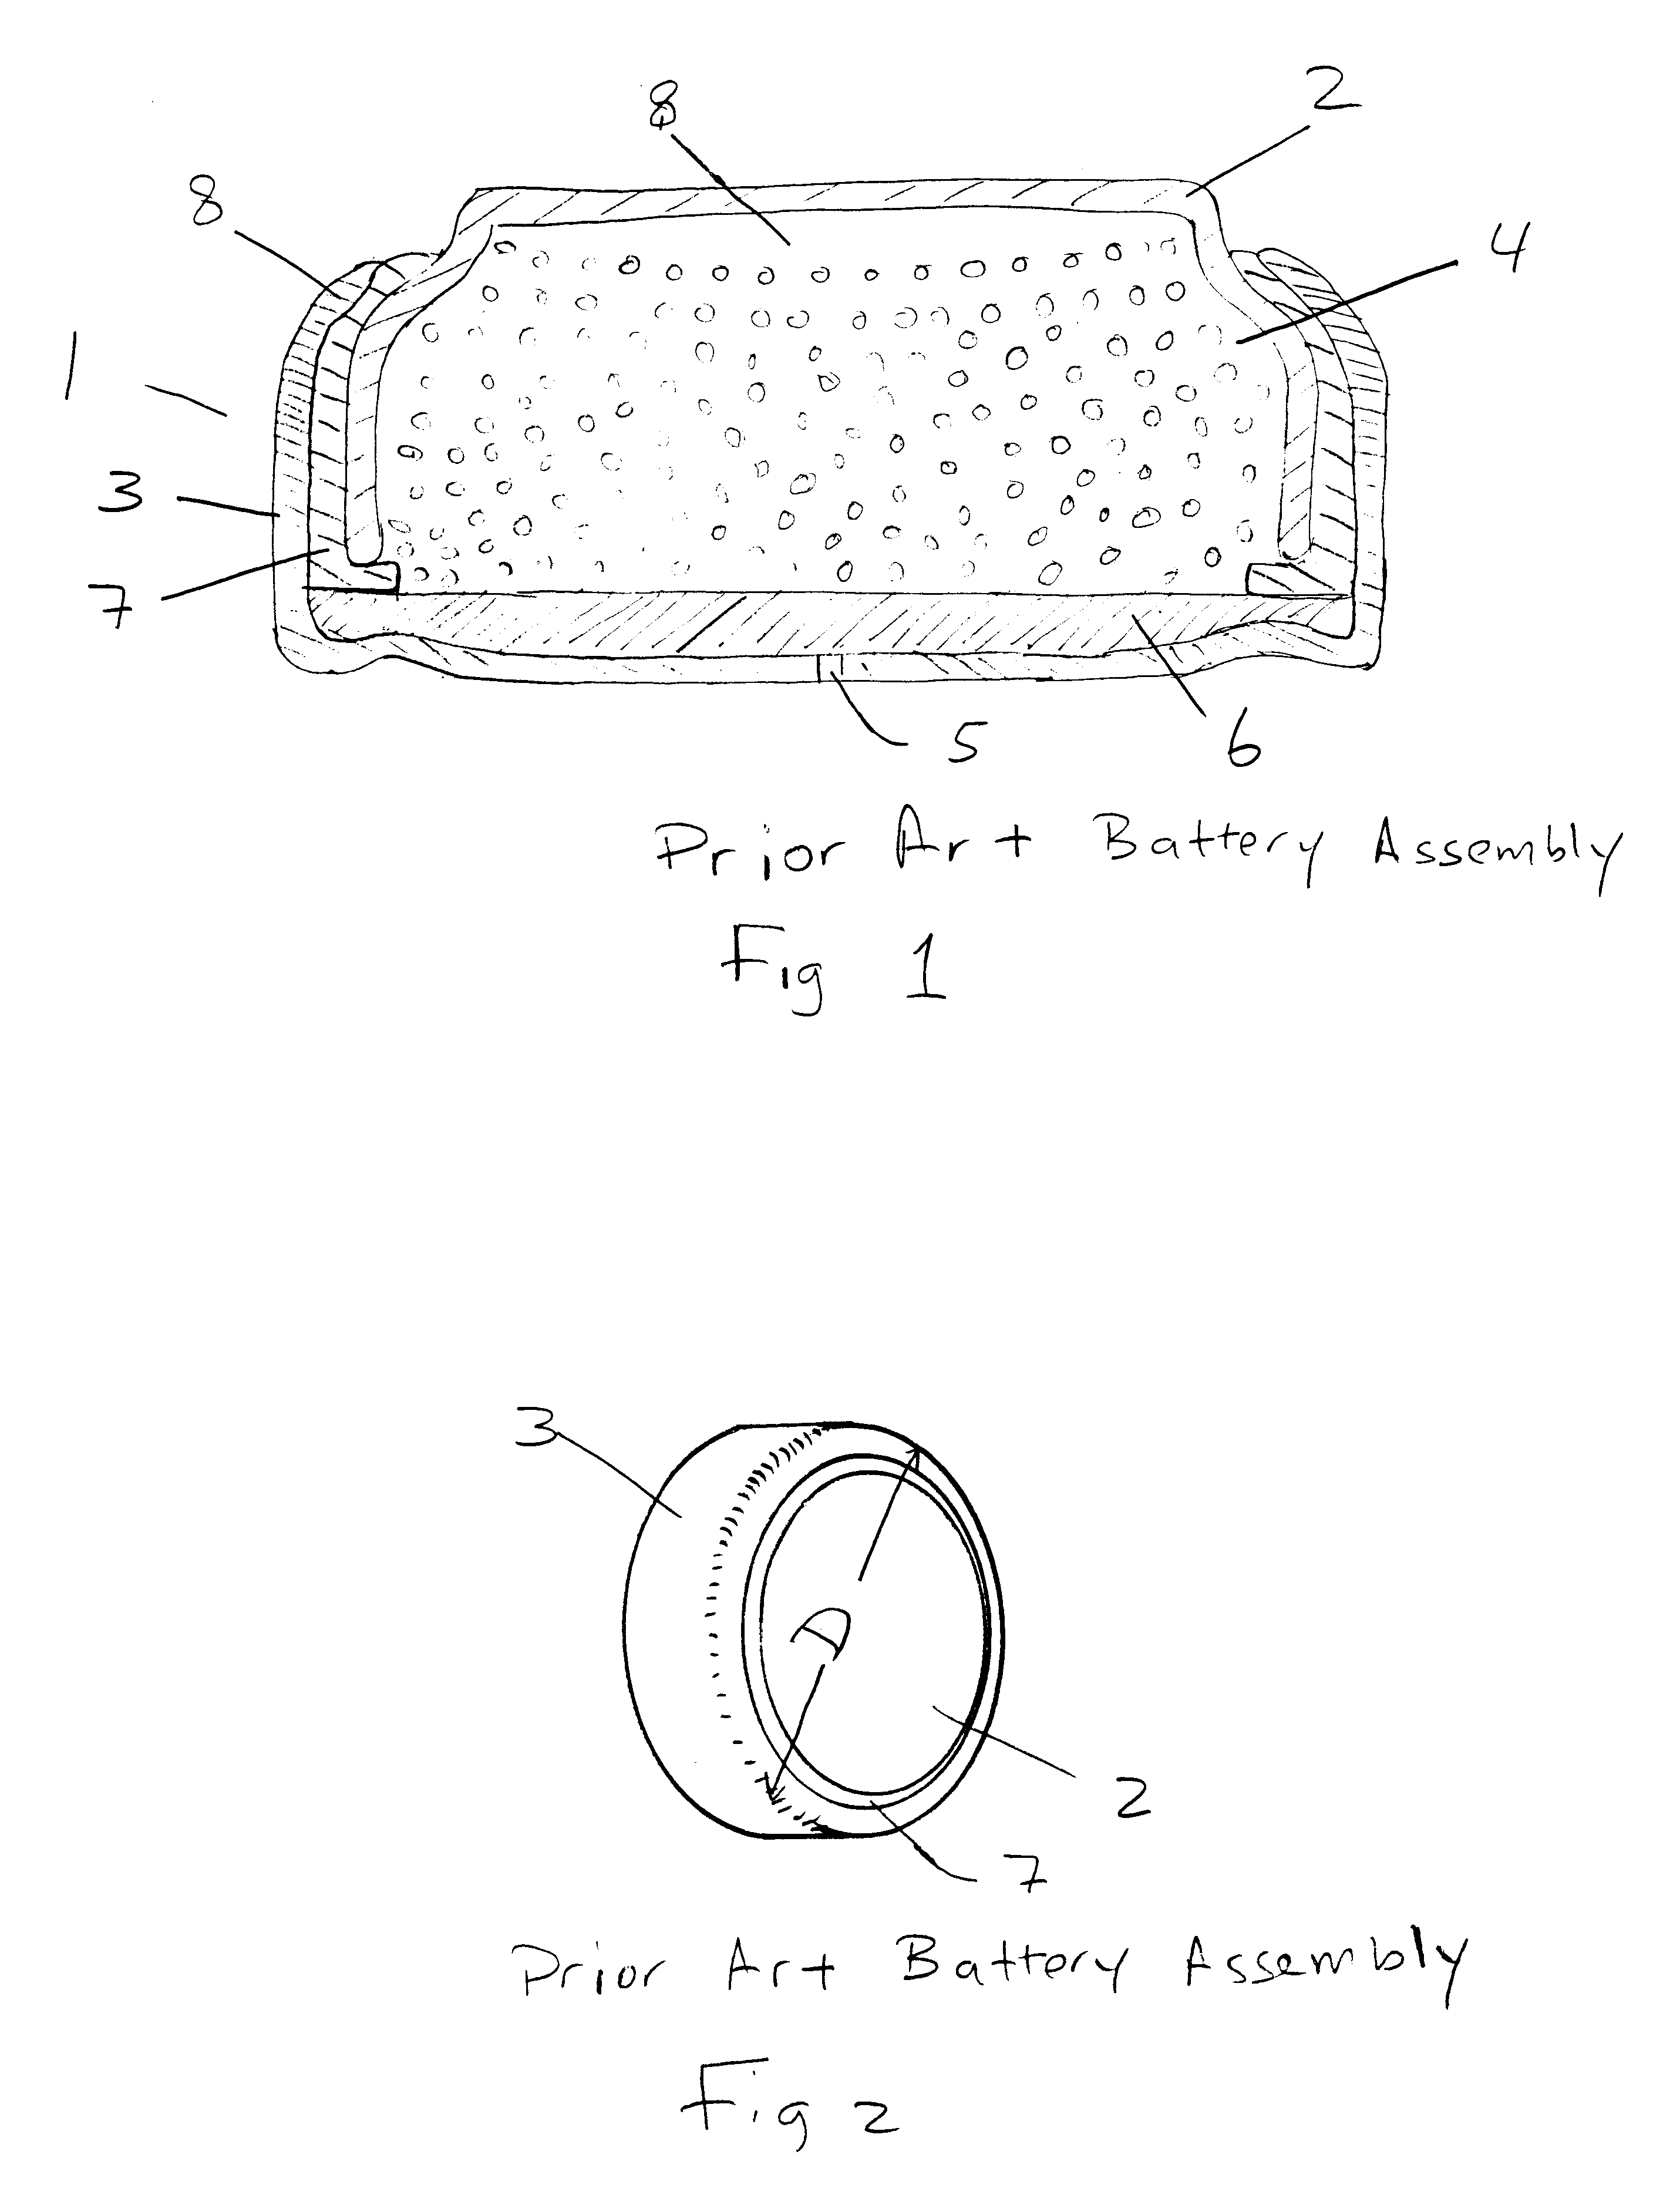 Miniature plastic battery assembly for canal hearing devices